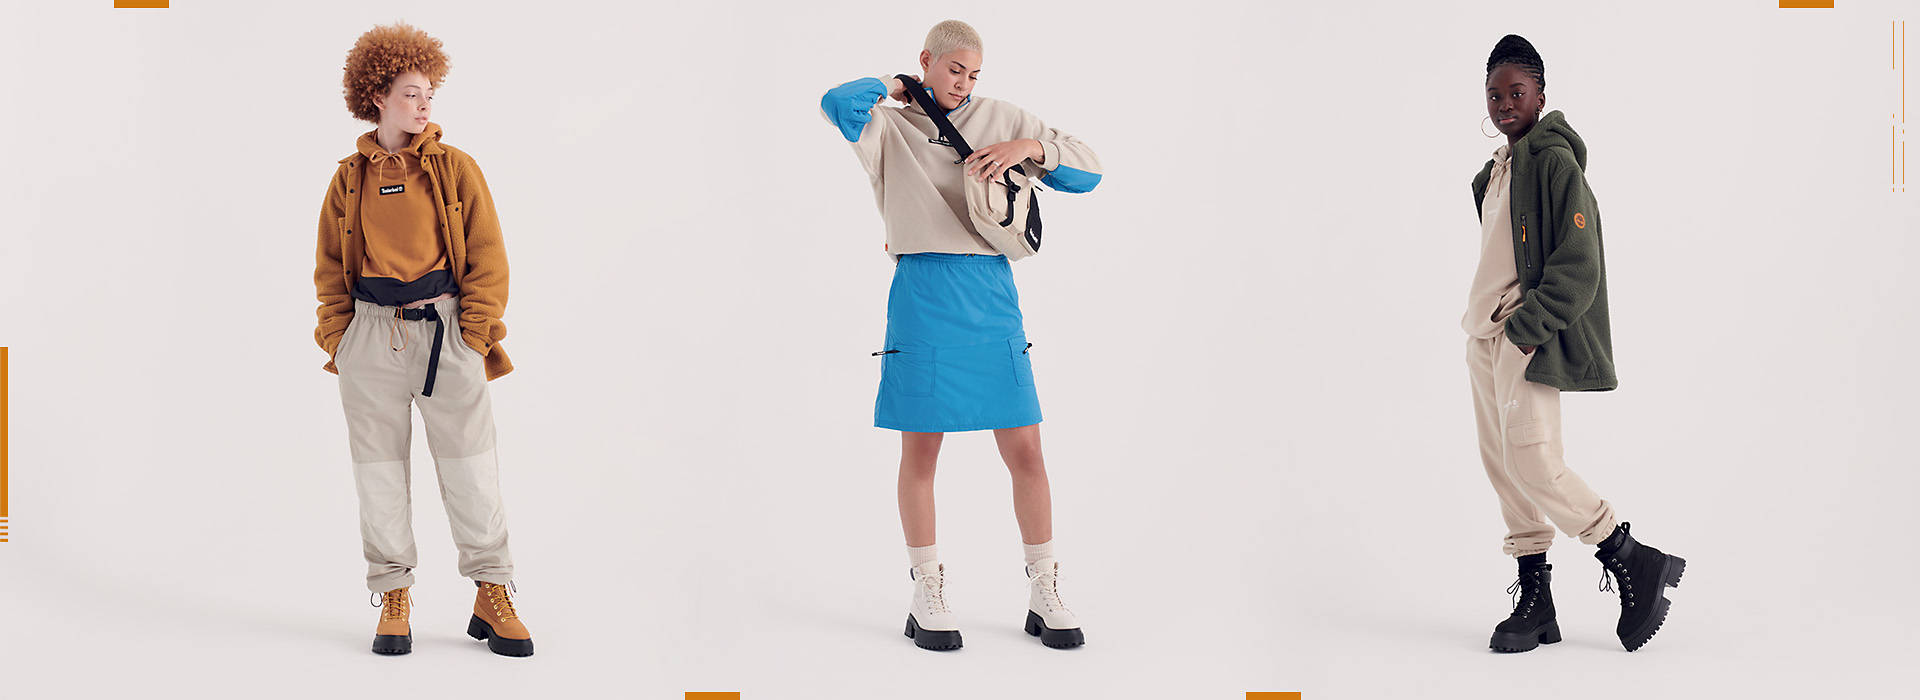 Image of a woman with cropped white-blond hair, wearing white platform boots with black outsoles, in a blue skirt and white/blue matching hoodie.